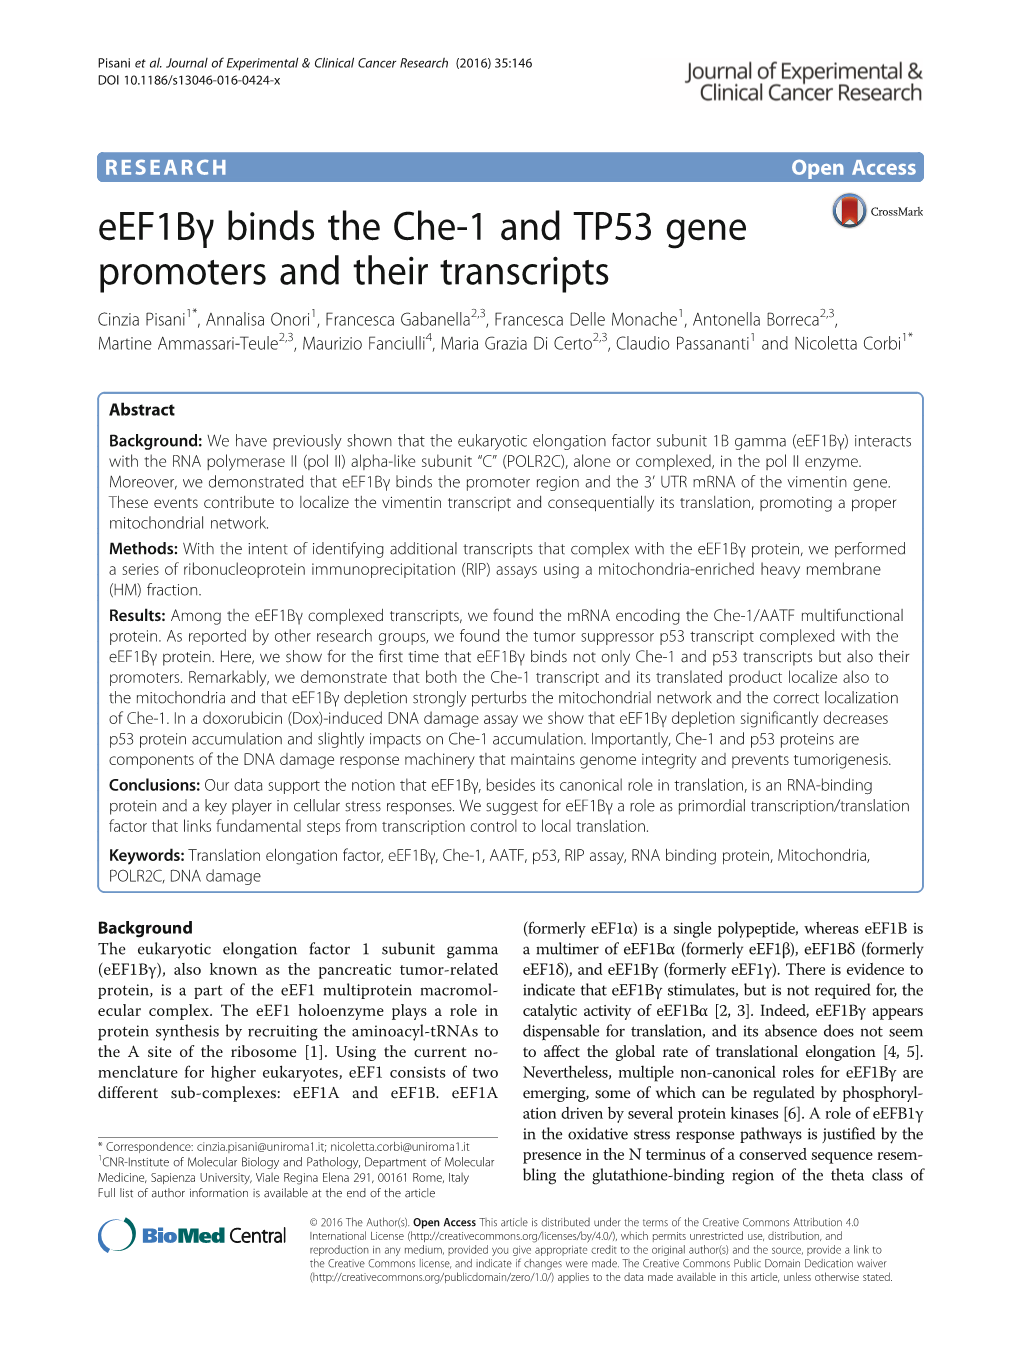 Eef1bγ Binds the Che-1 and TP53 Gene Promoters and Their Transcripts